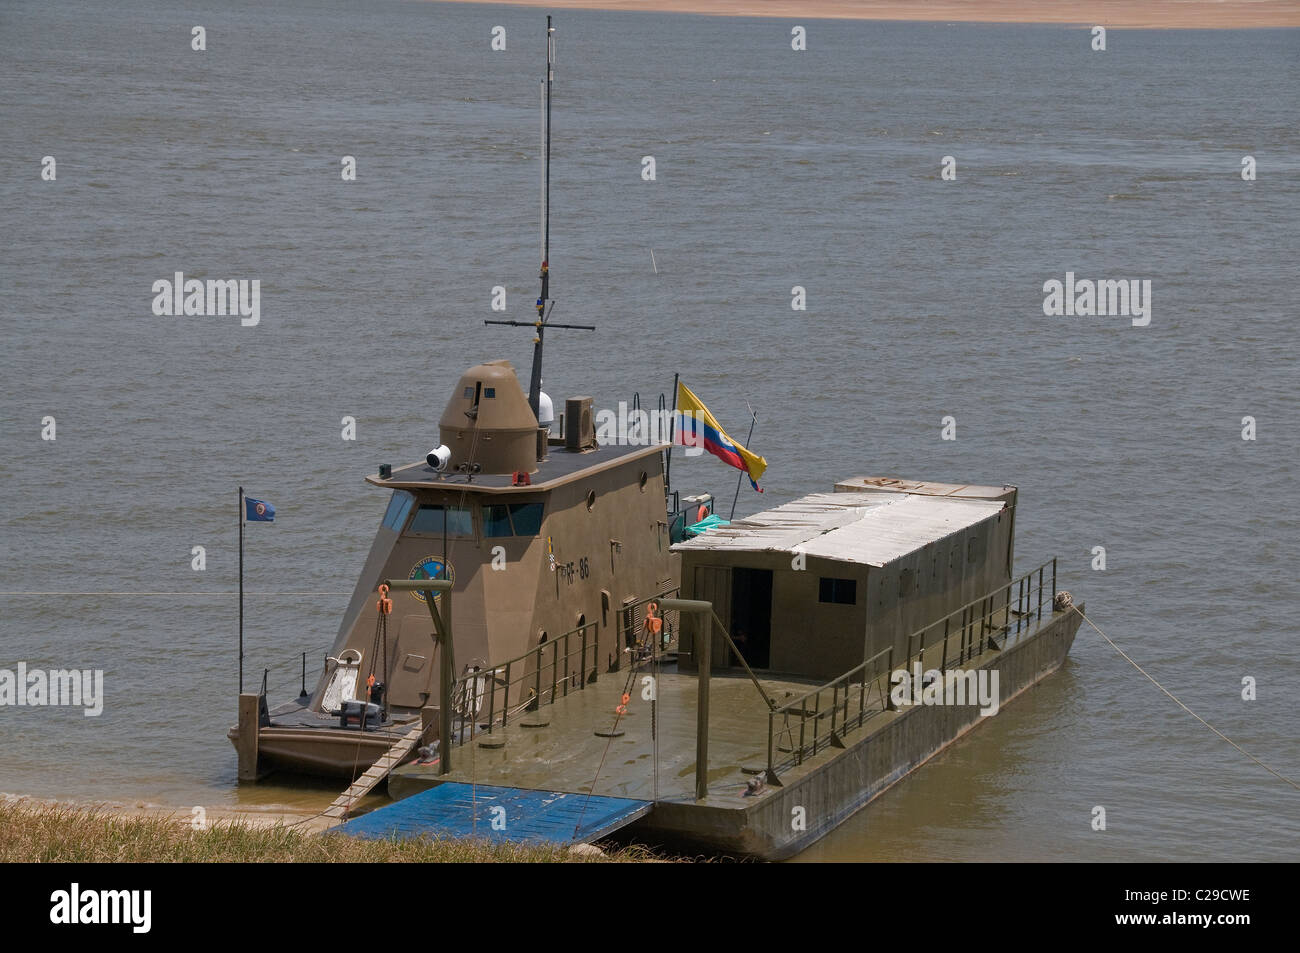 A Colombia navy ship is moored at Puerto Carreno on the Orinoco River that forms a border between the country and Venezuela. Stock Photo